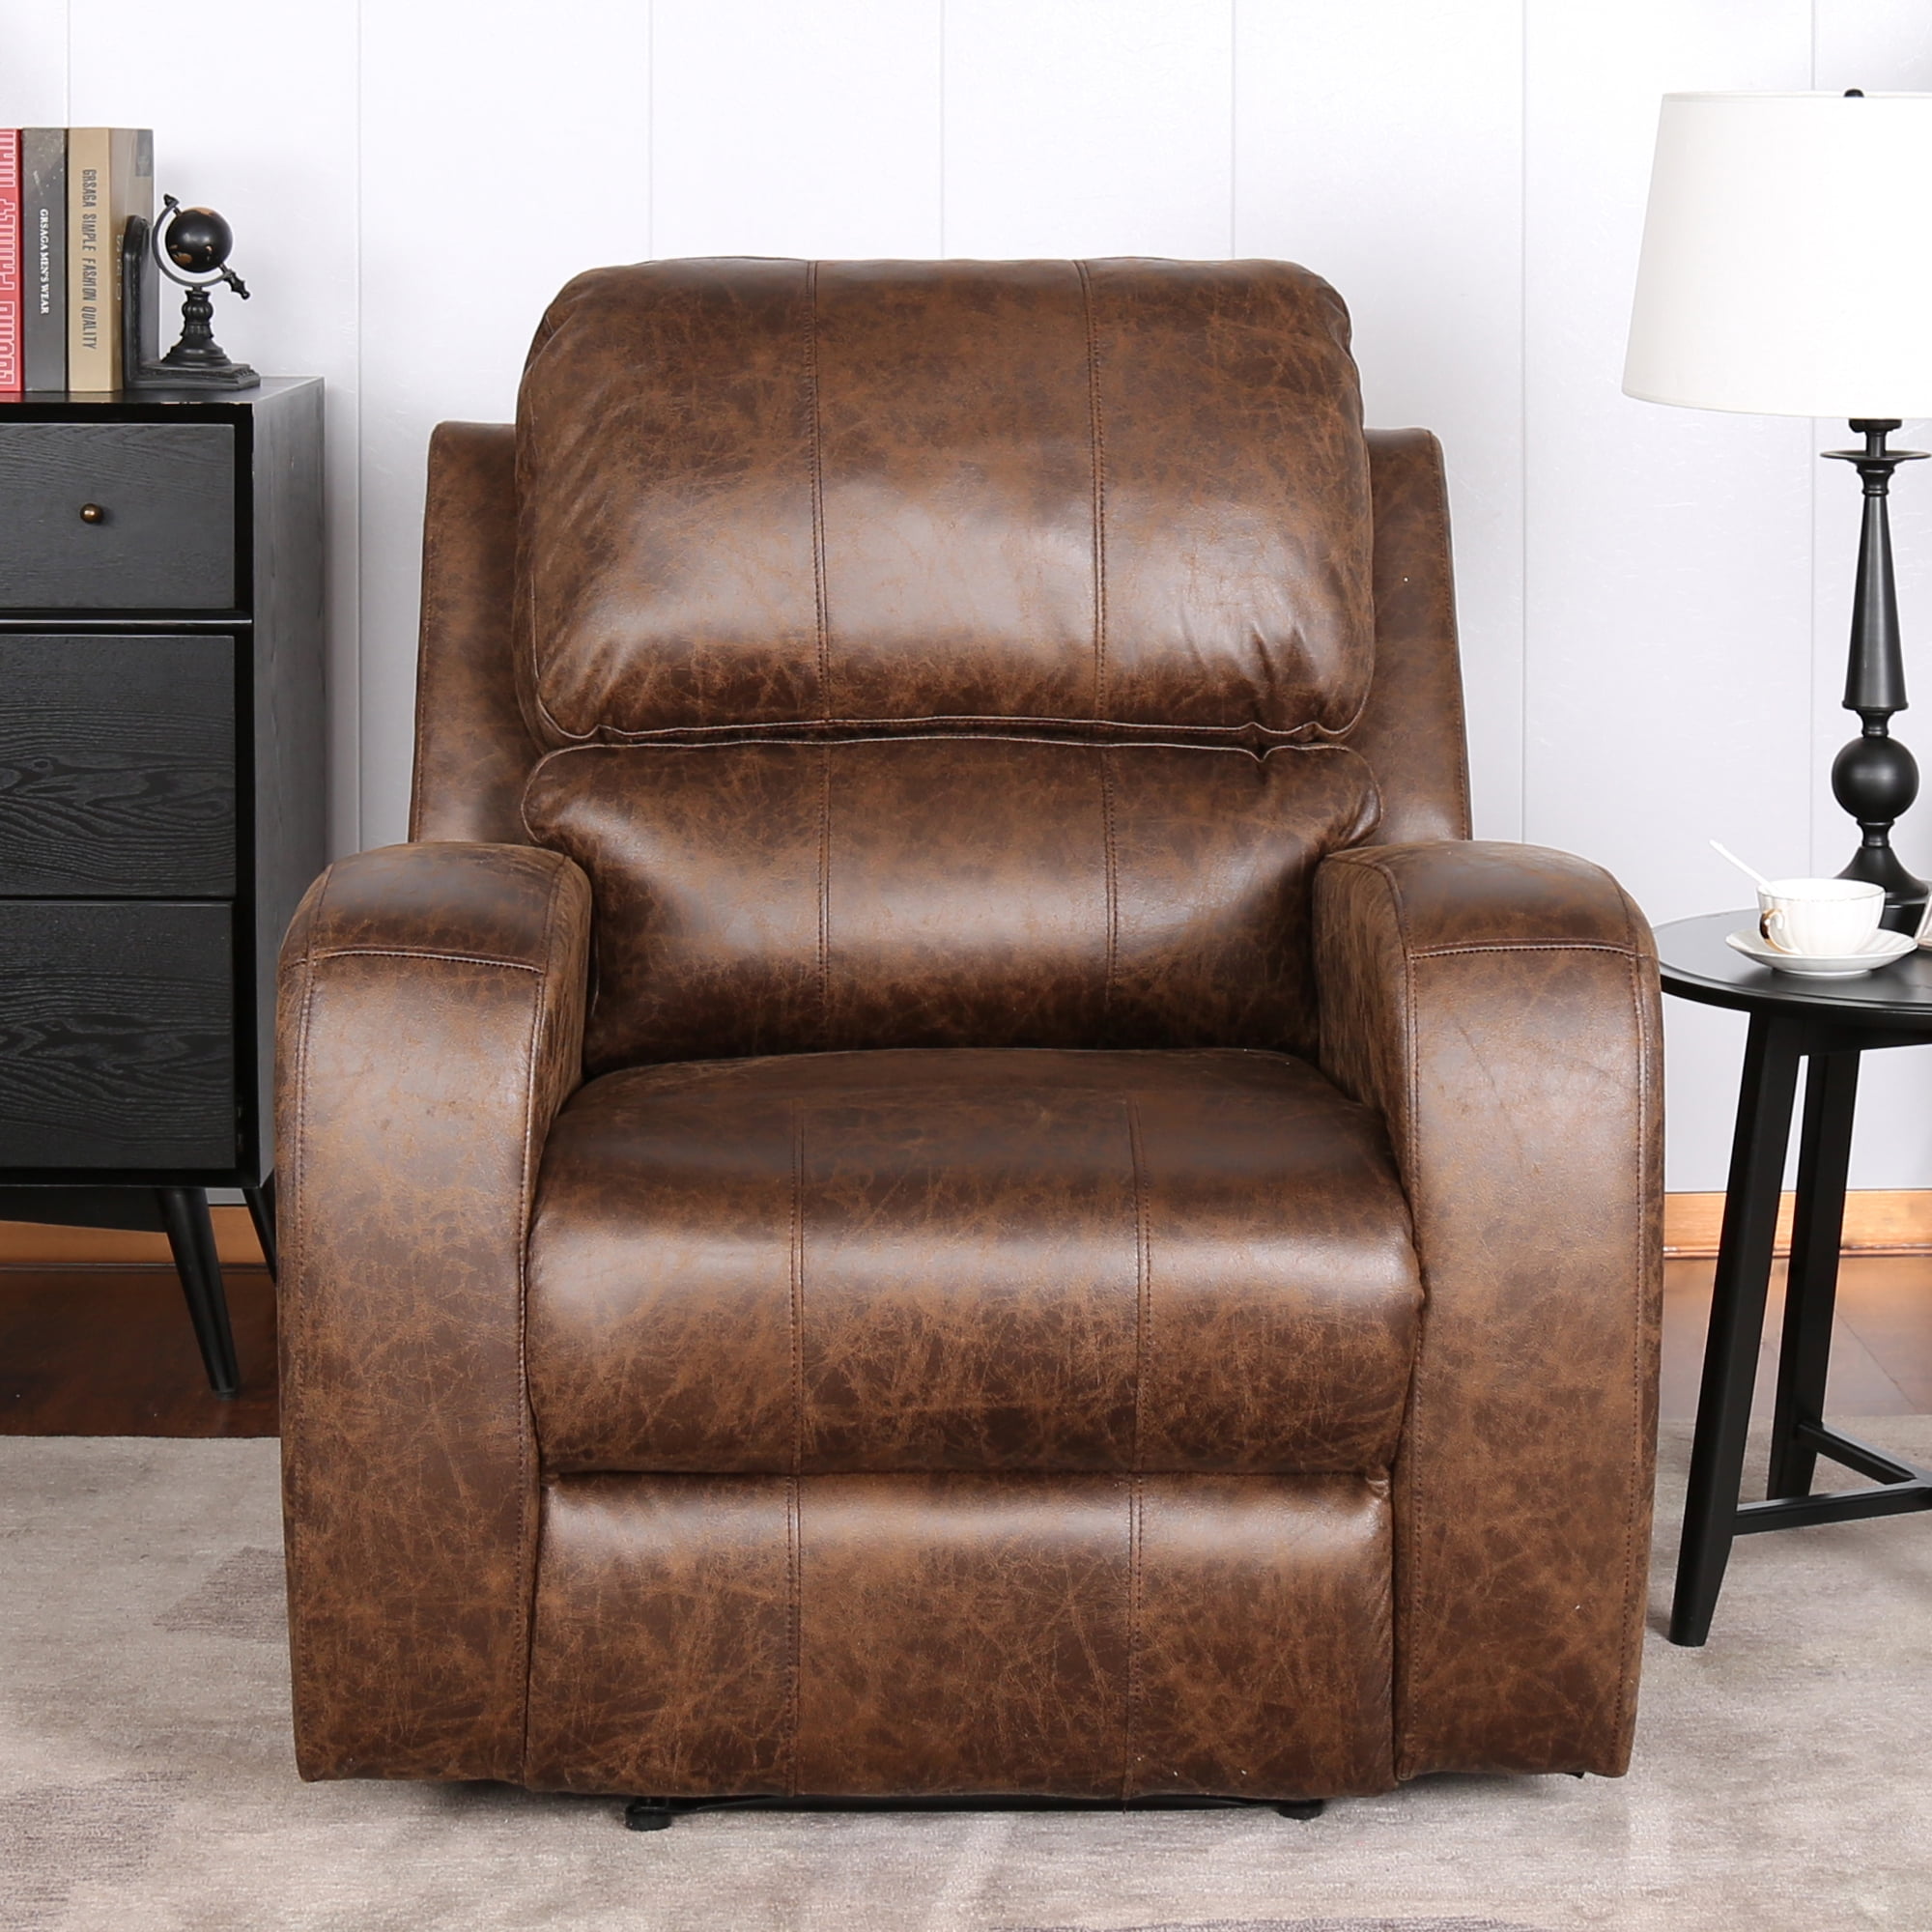 Power Electric Bonded Pu Leather, Rustic Leather Light Tan Electric Recliner Chair